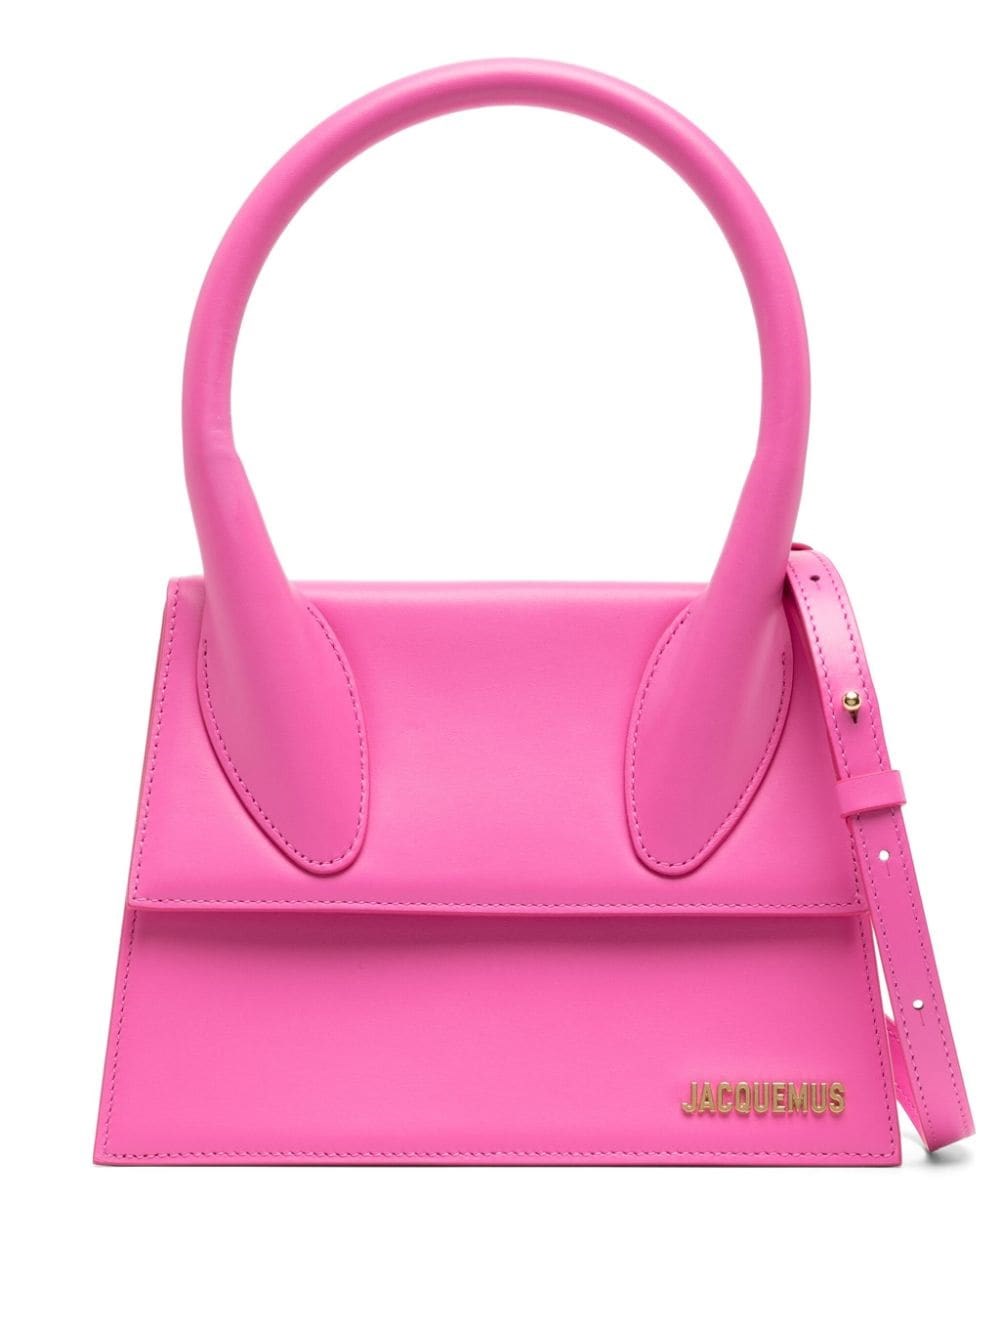 Jacquemus "le Grand Chiquito" Bag In Pink